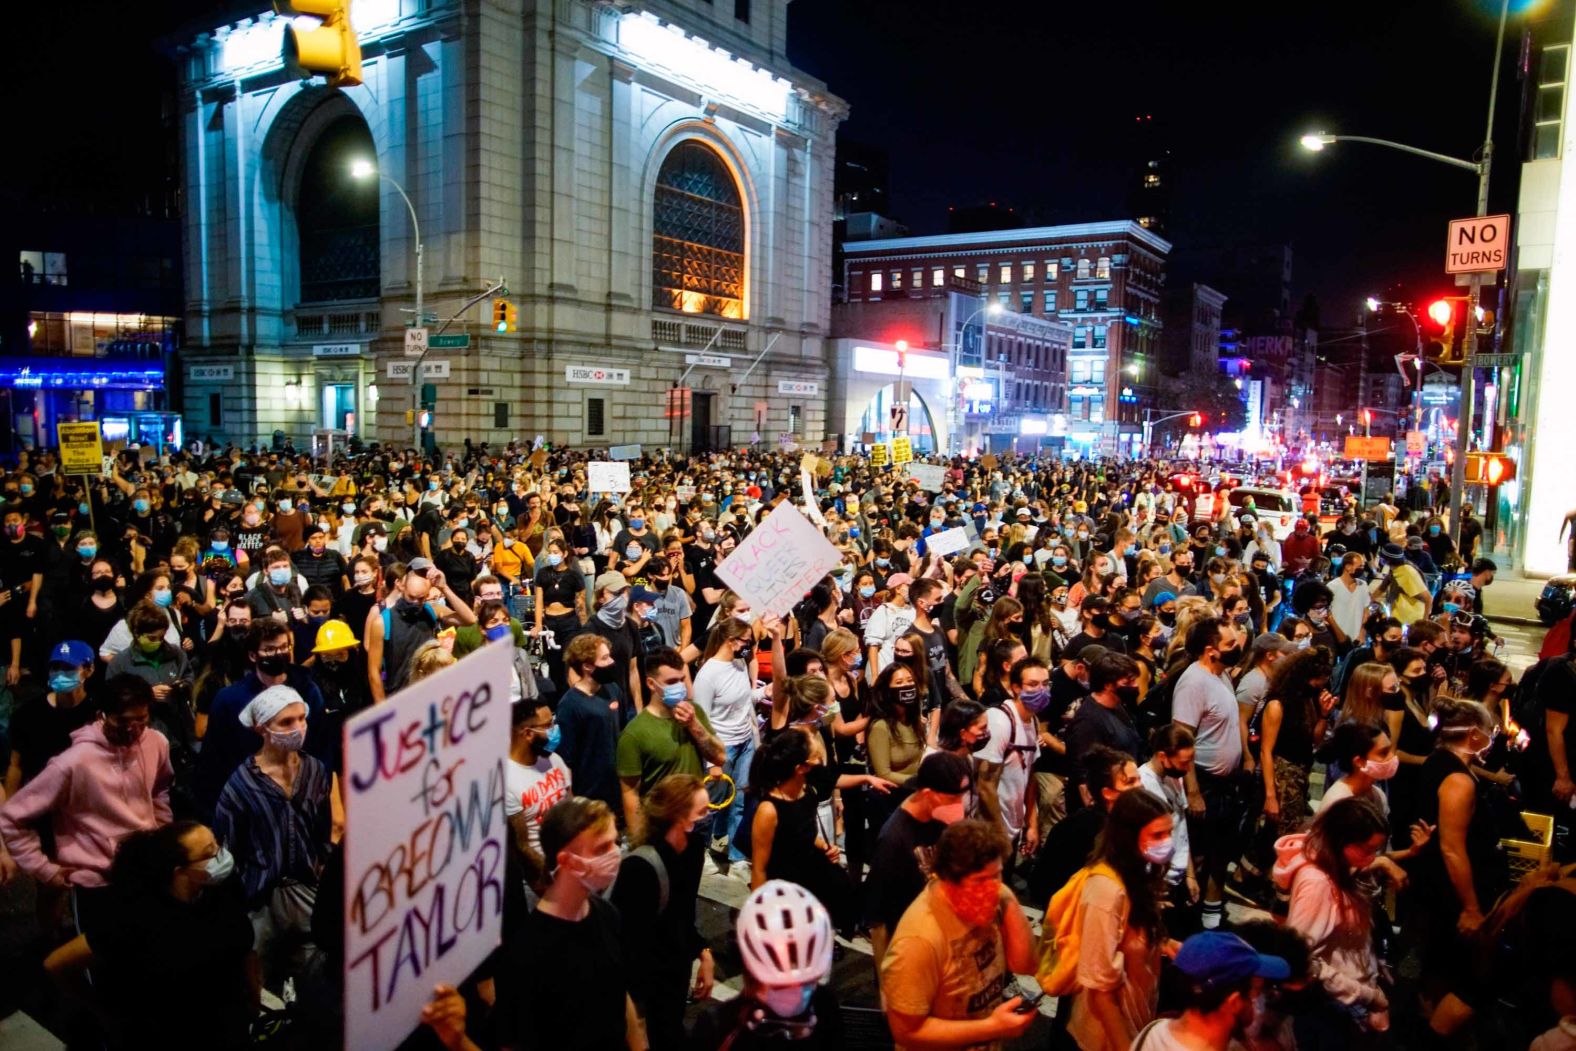 Demonstrators march during a protest in New York over a Kentucky grand jury's decision not to indict any police officers for the killing of Taylor.